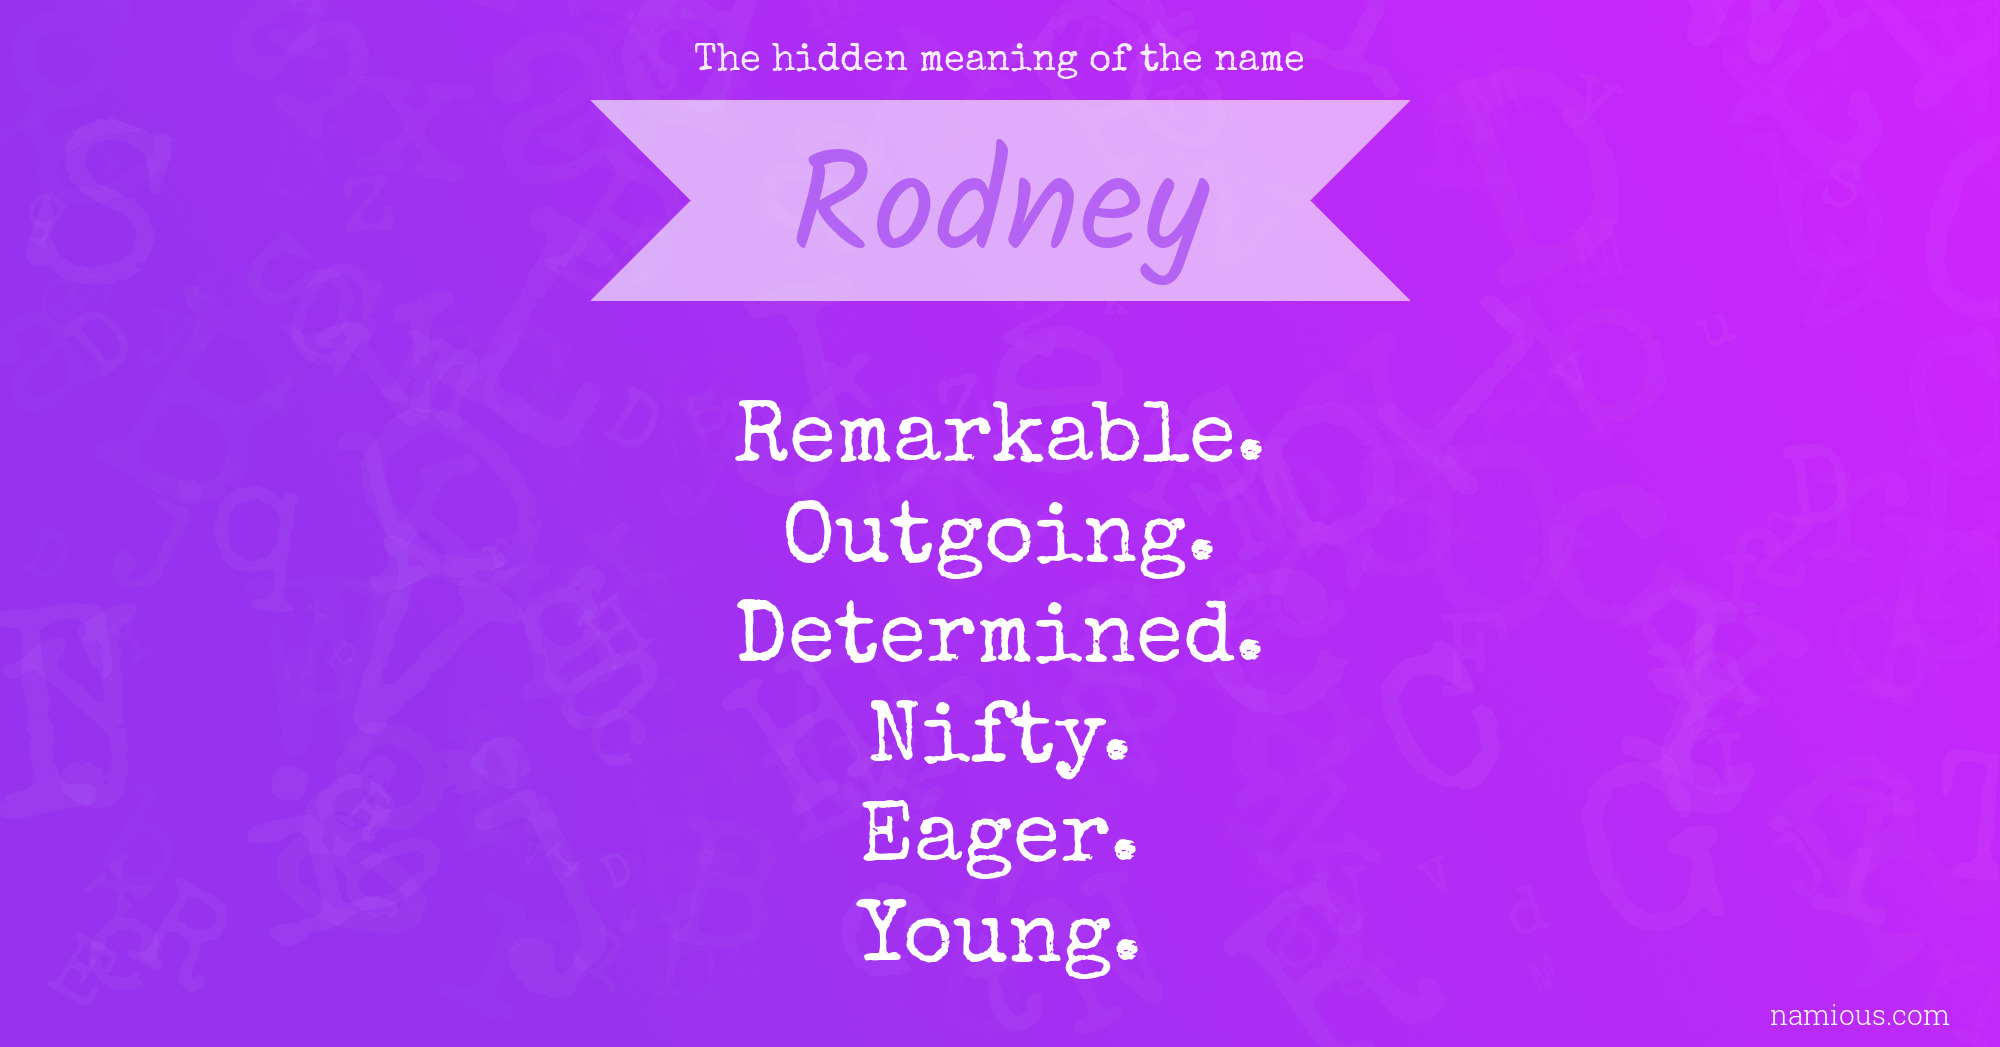 The hidden meaning of the name Rodney